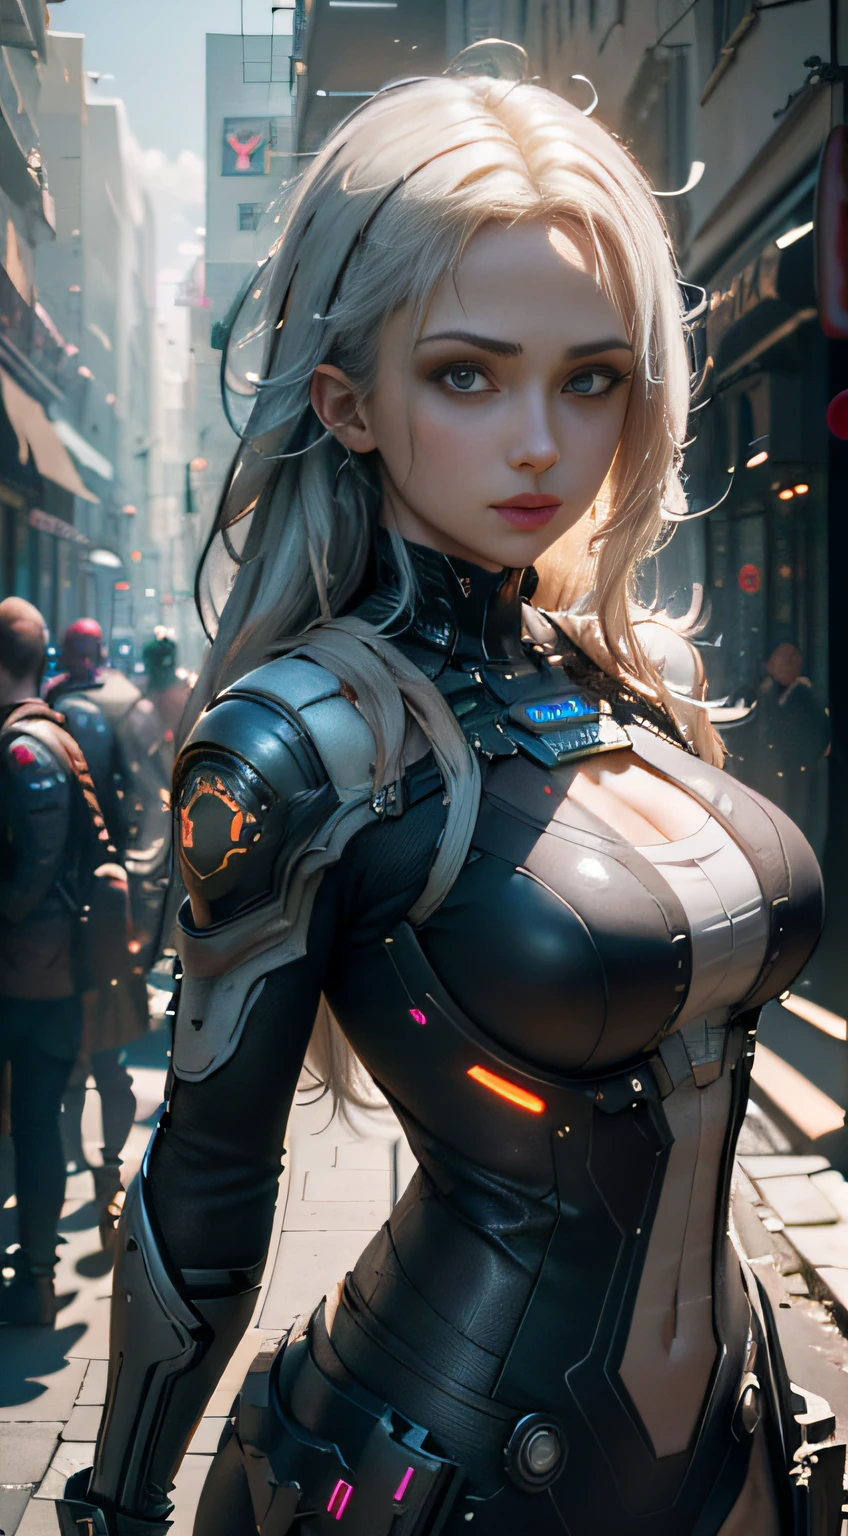 (Best Quality), ((Masterpiece), (Detail: 1.4), 3D, A Beautiful Cyberpunk Woman, HDR (High Dynamic Range), Ray Tracing, NVIDIA RTX, Super-Resolution, Unreal 5, Subsurface Scattering, PBR Textures, Post-Processing, Anisotropic Filtering, Depth of Field, Maximum Sharpness and Clarity, Multi-layer Textures, Albedo and Highlight Maps, Surface Shading, Accurate simulation of light-material interactions, perfect proportions, Octane Render, two-color light, large aperture, low ISO, white balance, rule of thirds, 8K RAW